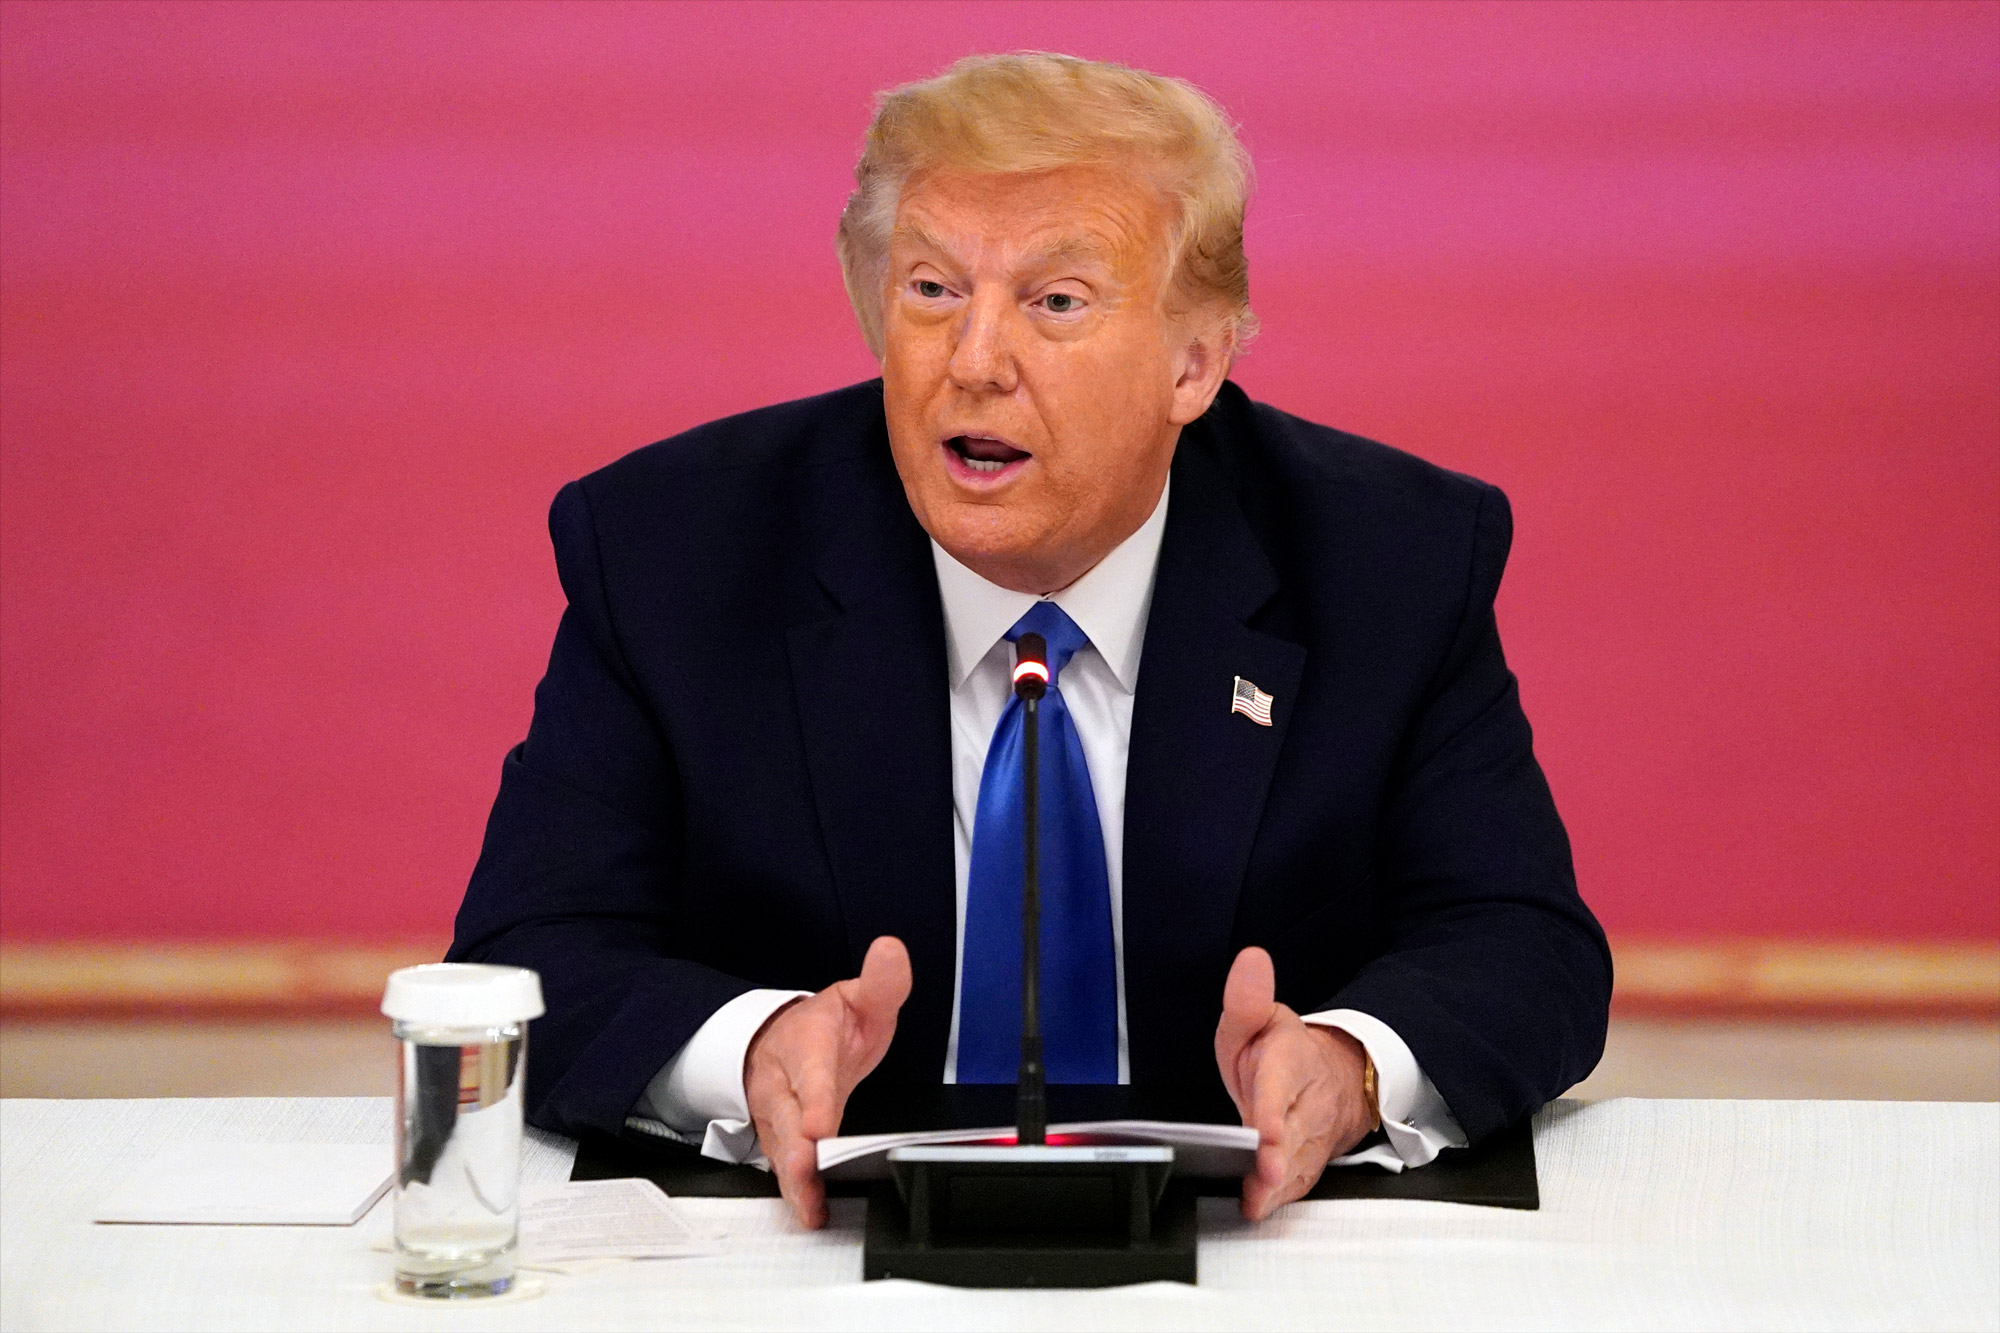 President Donald Trump answers questions from reporters during a roundtable with people positively impacted by law enforcement on July 13 in Washington.